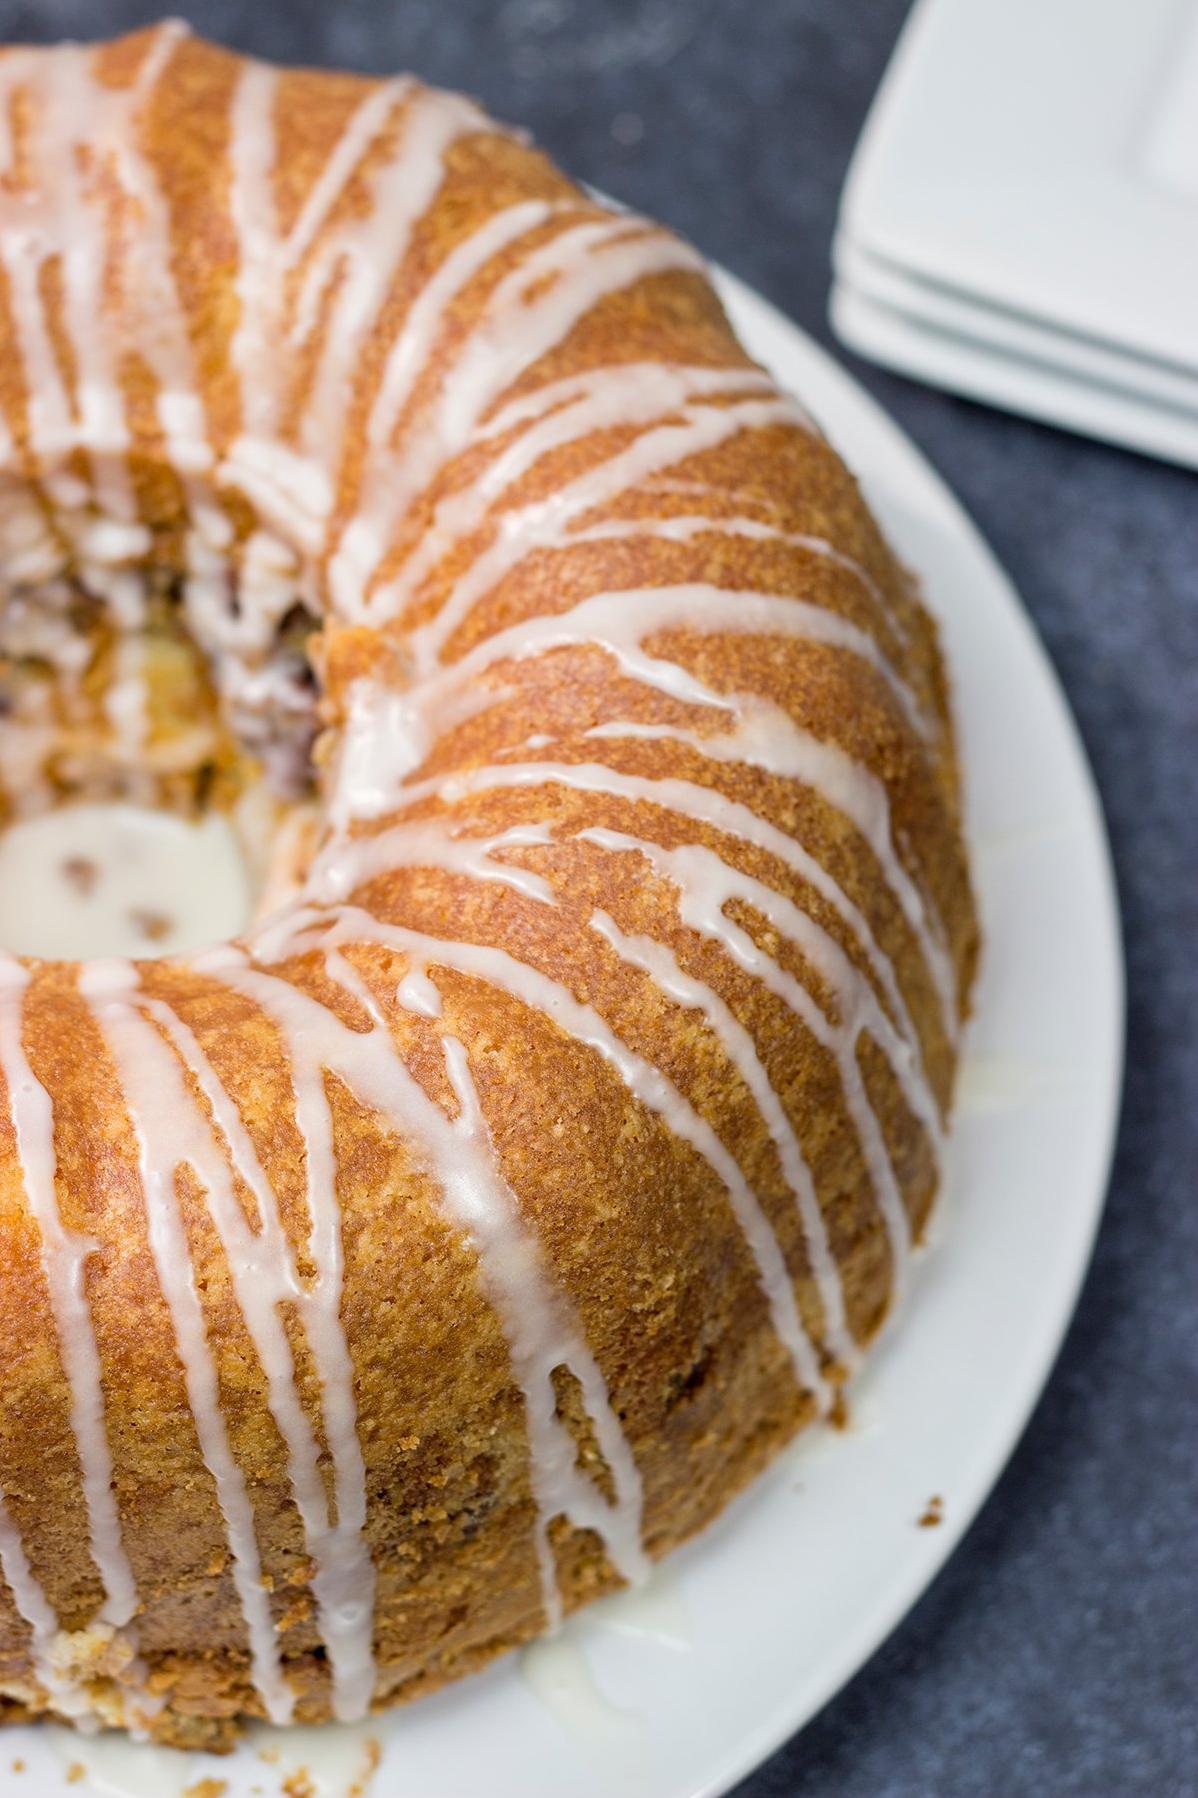  Warm up your day with this delicious cinnamon pecan cake.